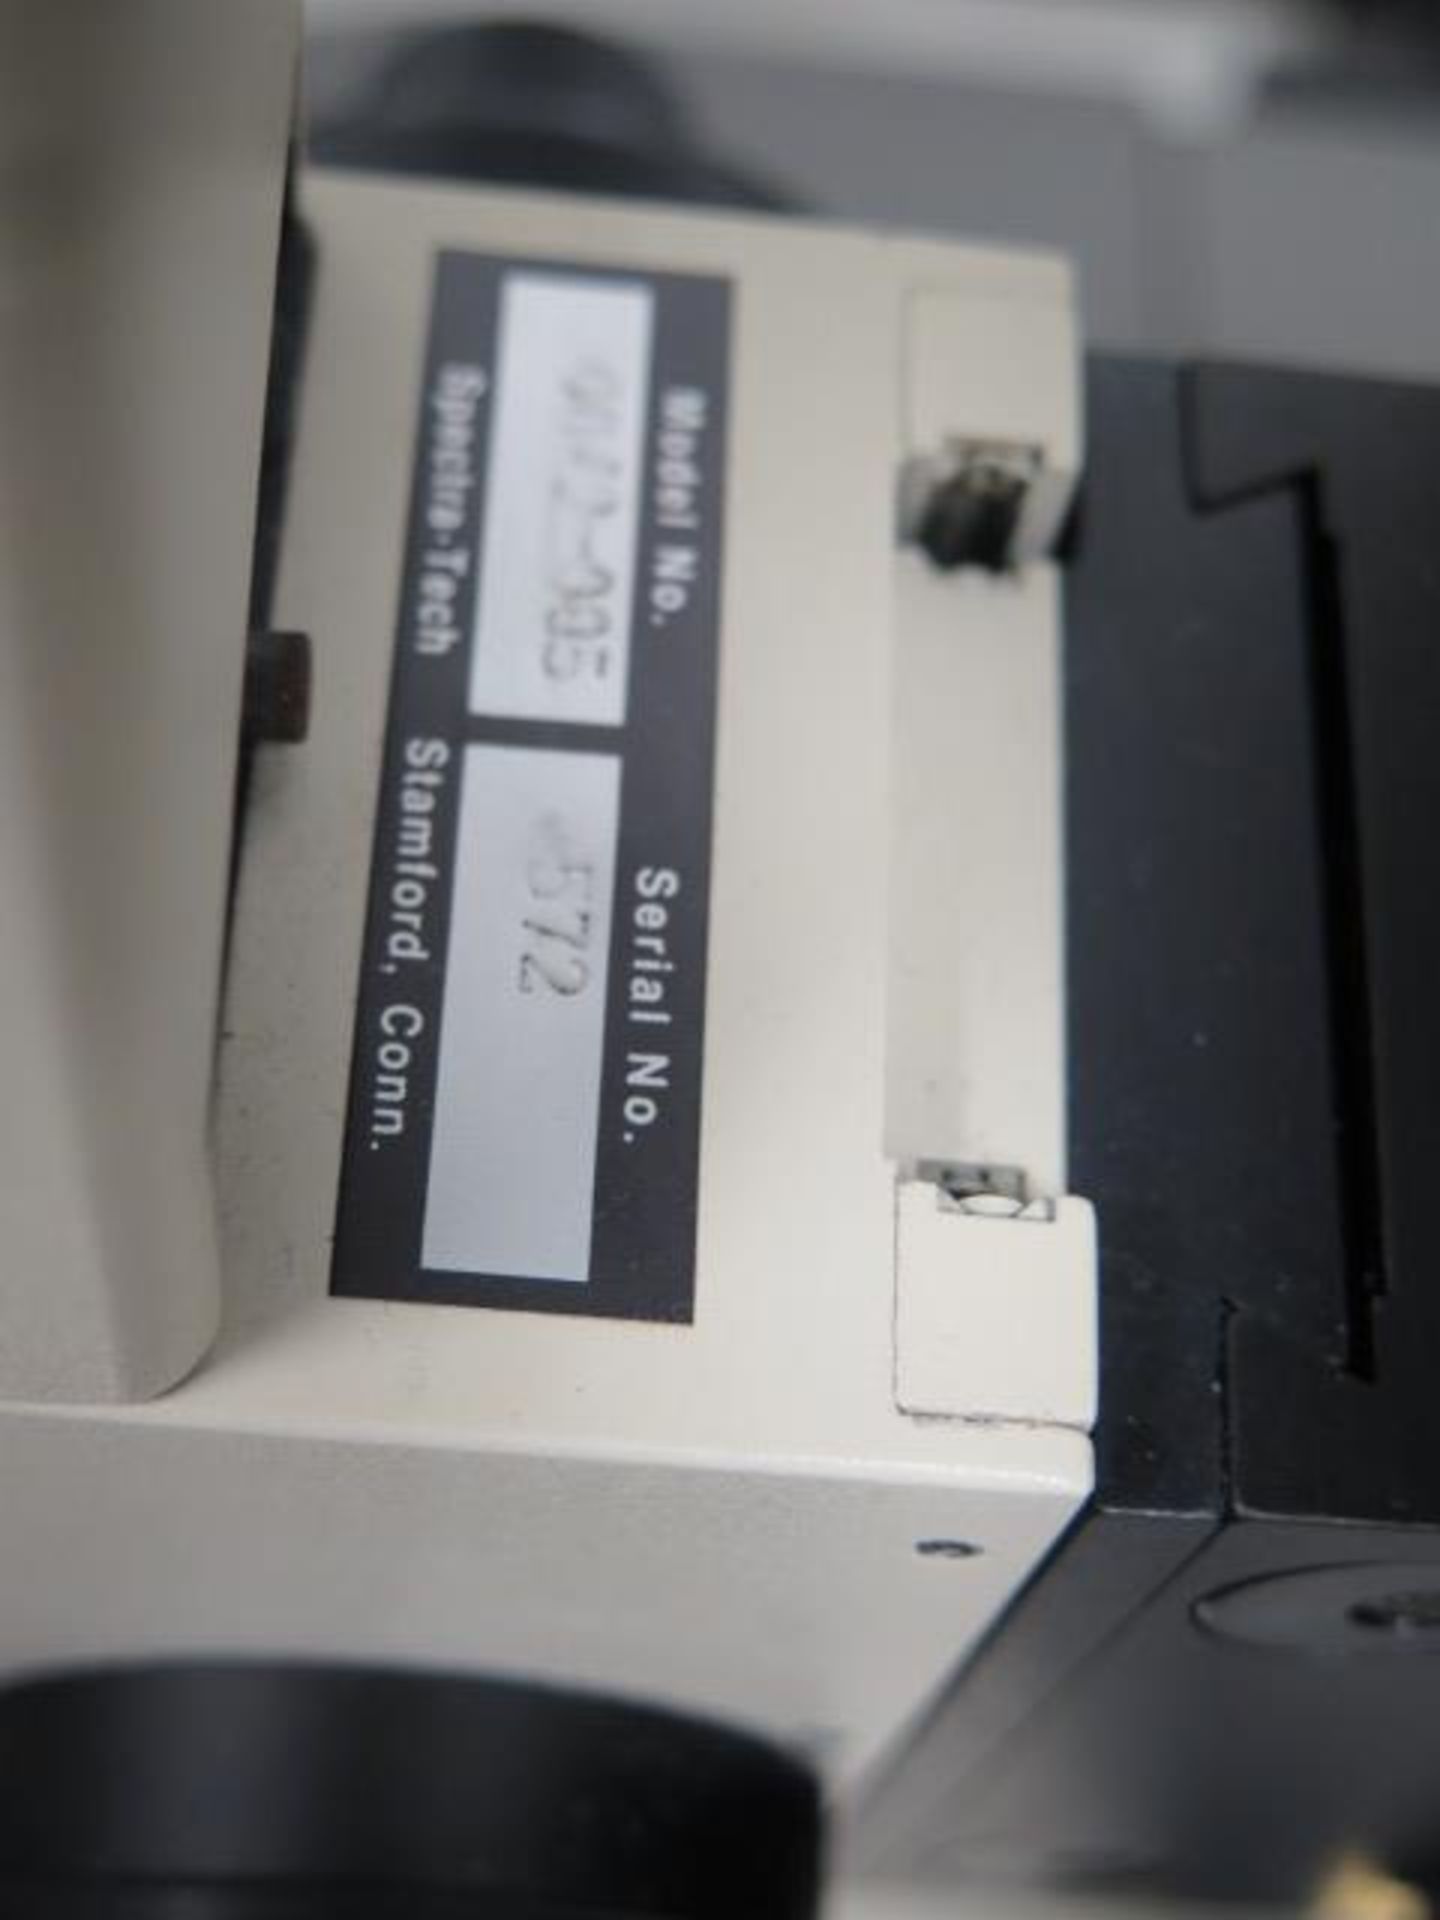 Nicolet “Nic-Plan” Infrared Microscope w/ Access (SOLD AS-IS - NO WARRANTY) - Image 12 of 12